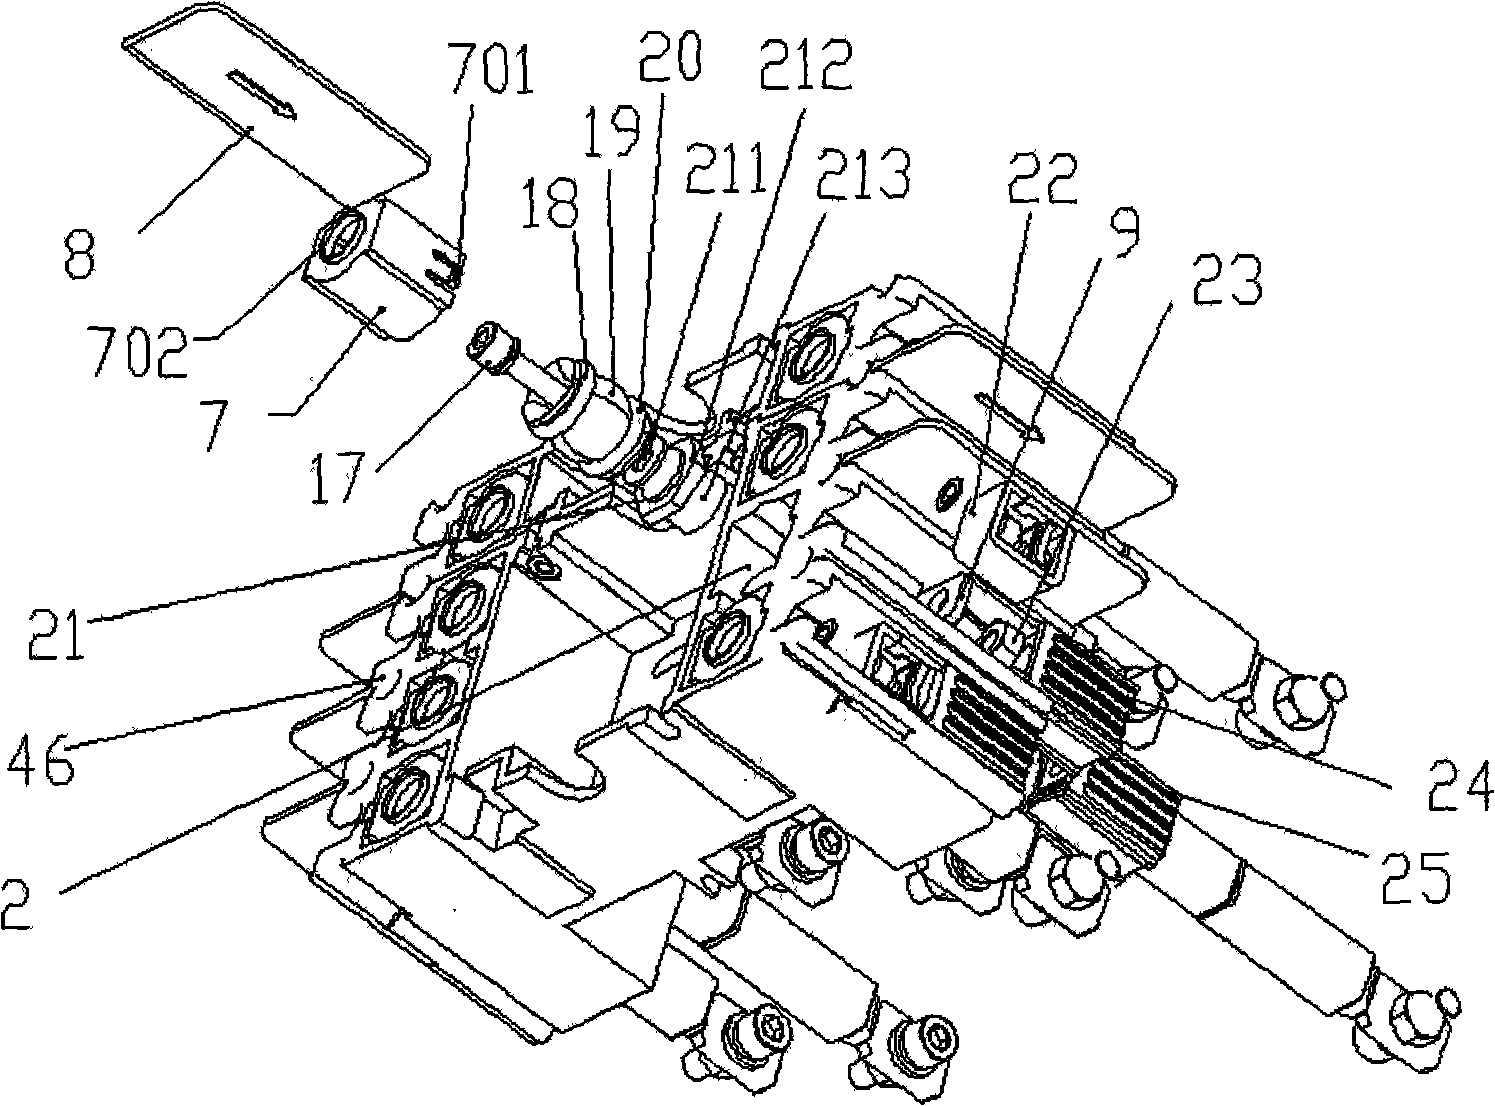 Plug-in base of plastic shell type electric appliance having multiple wiring functions